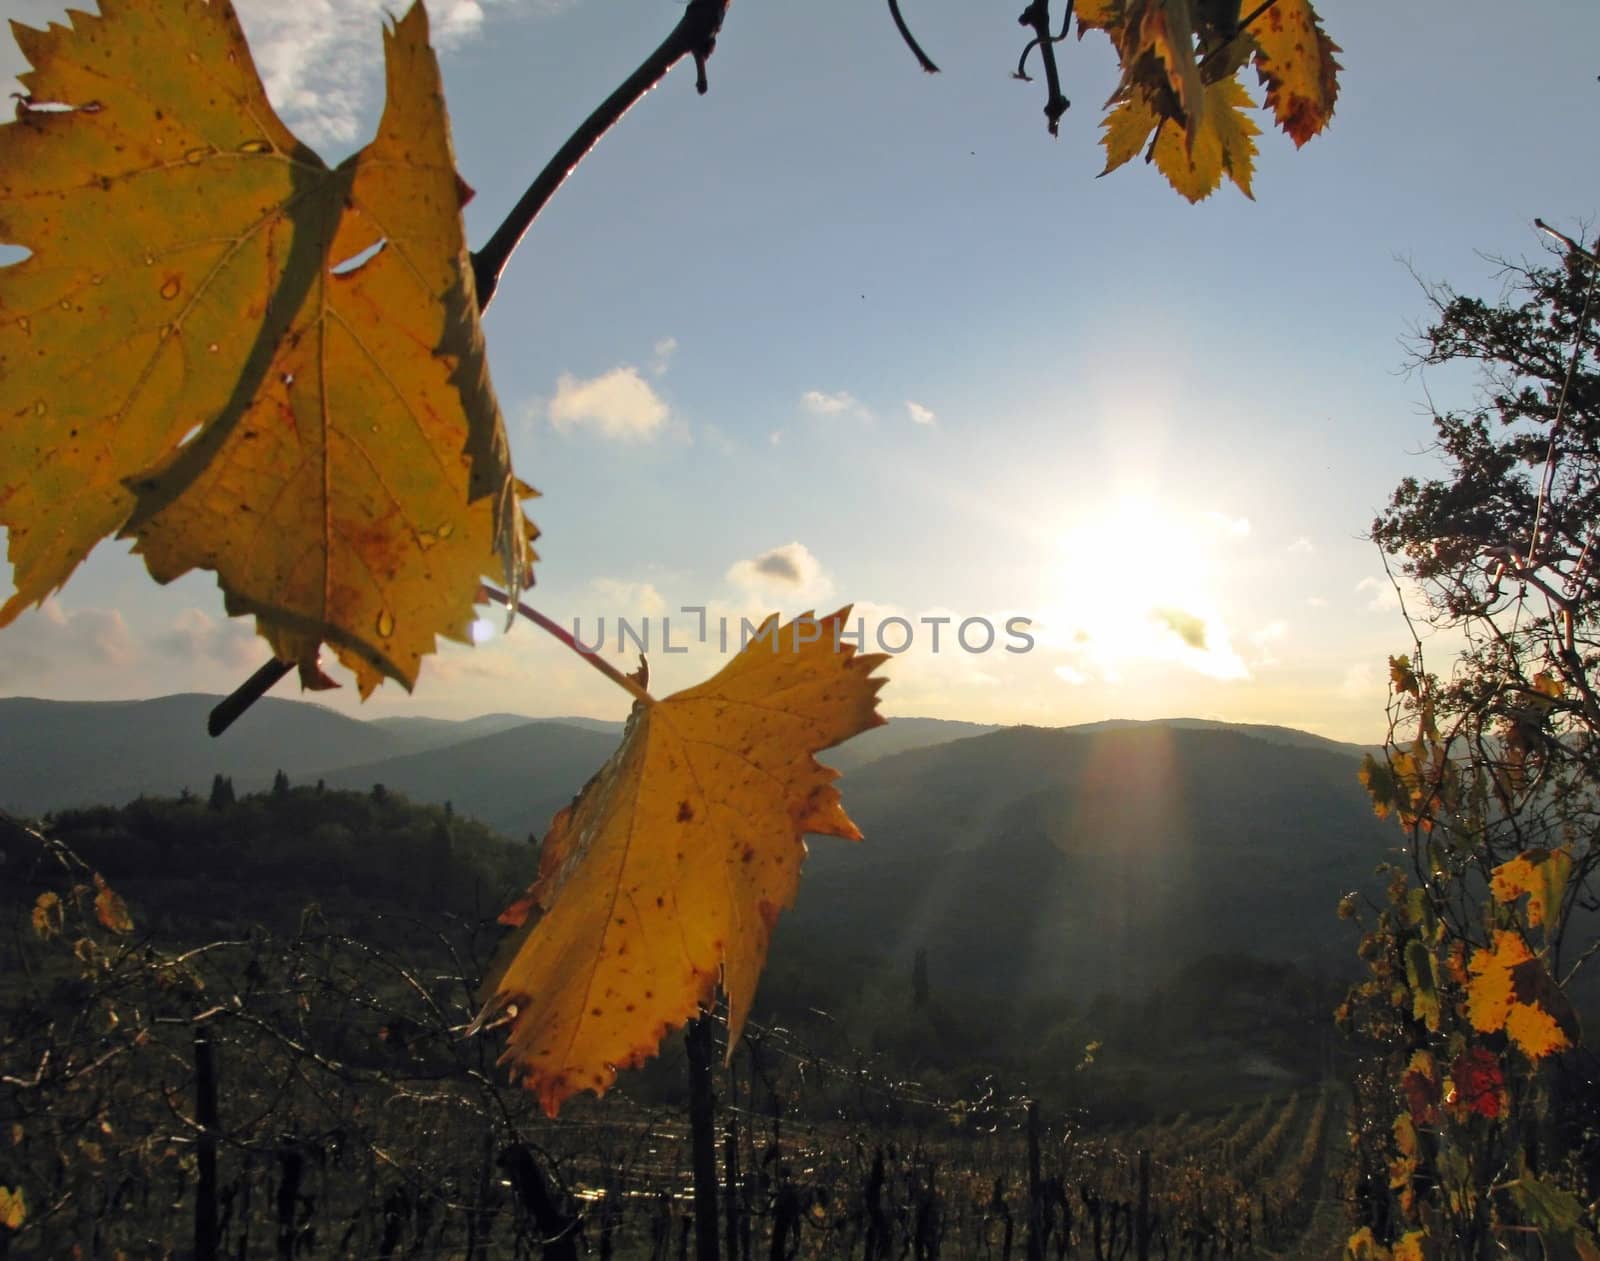 Grapevine Leaf and Tuscan Sunrise by bellafotosolo